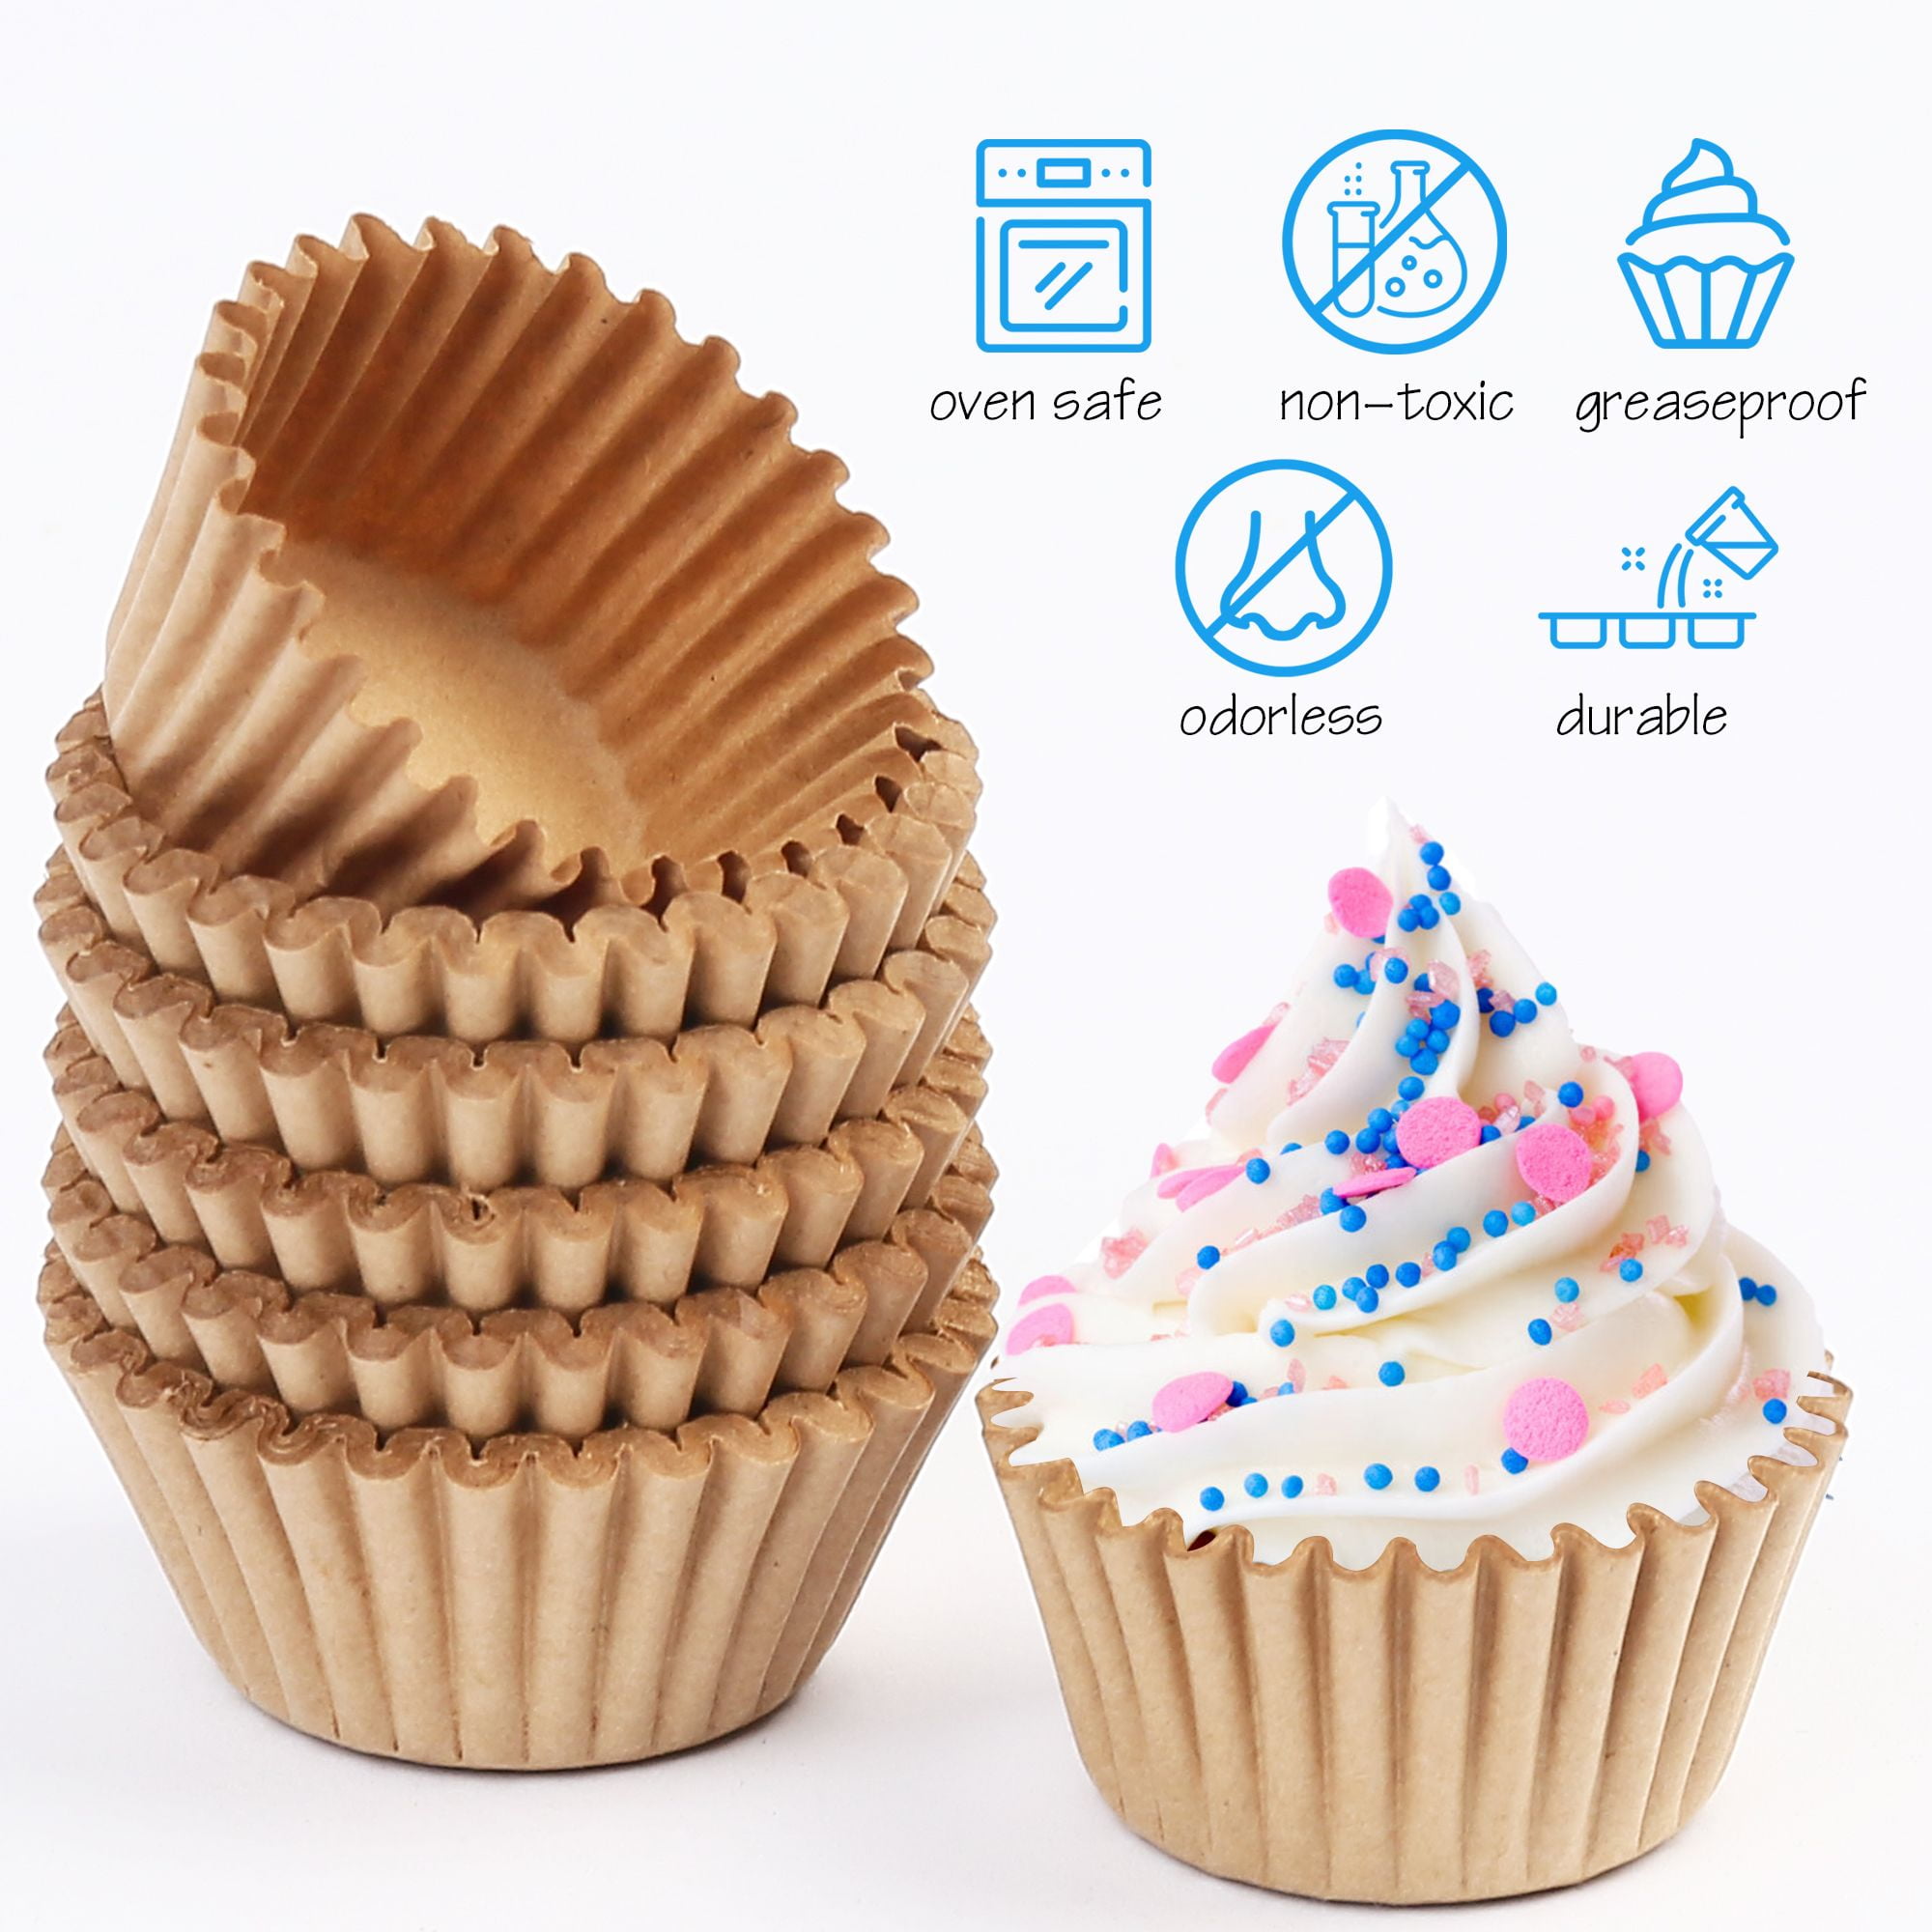 Lotfancy 500pcs Small Cupcake Wrappers, Mini Cupcake Liners, Brown, Women's, Size: 1.25 x 0.84